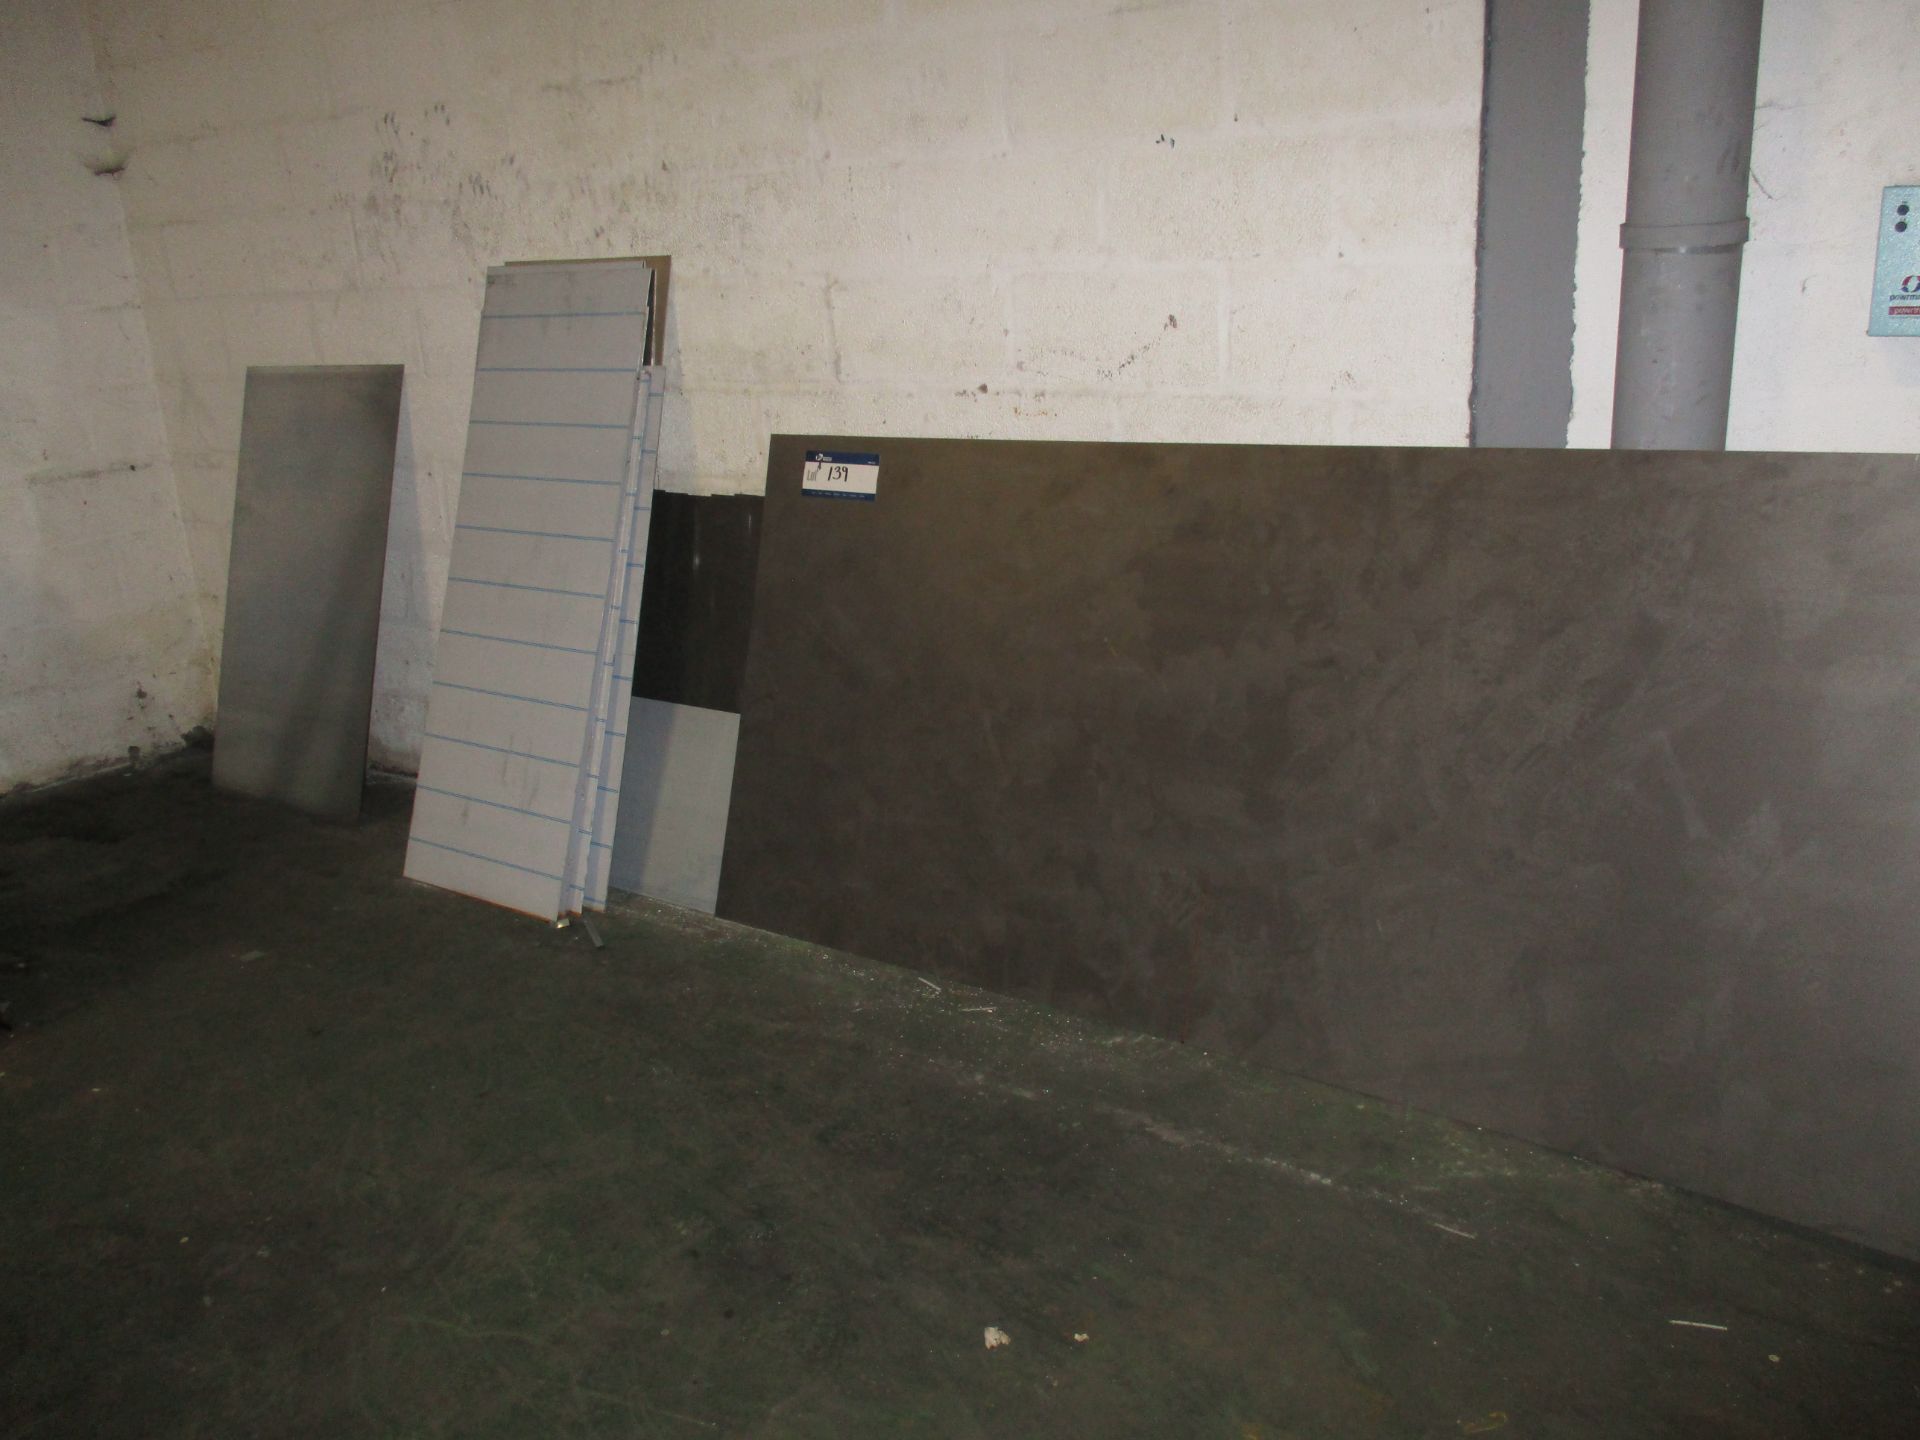 Quantity of Mixed Sheet Steel and Aluminium Offcuts (as set out on rack and against wall) - Image 2 of 2